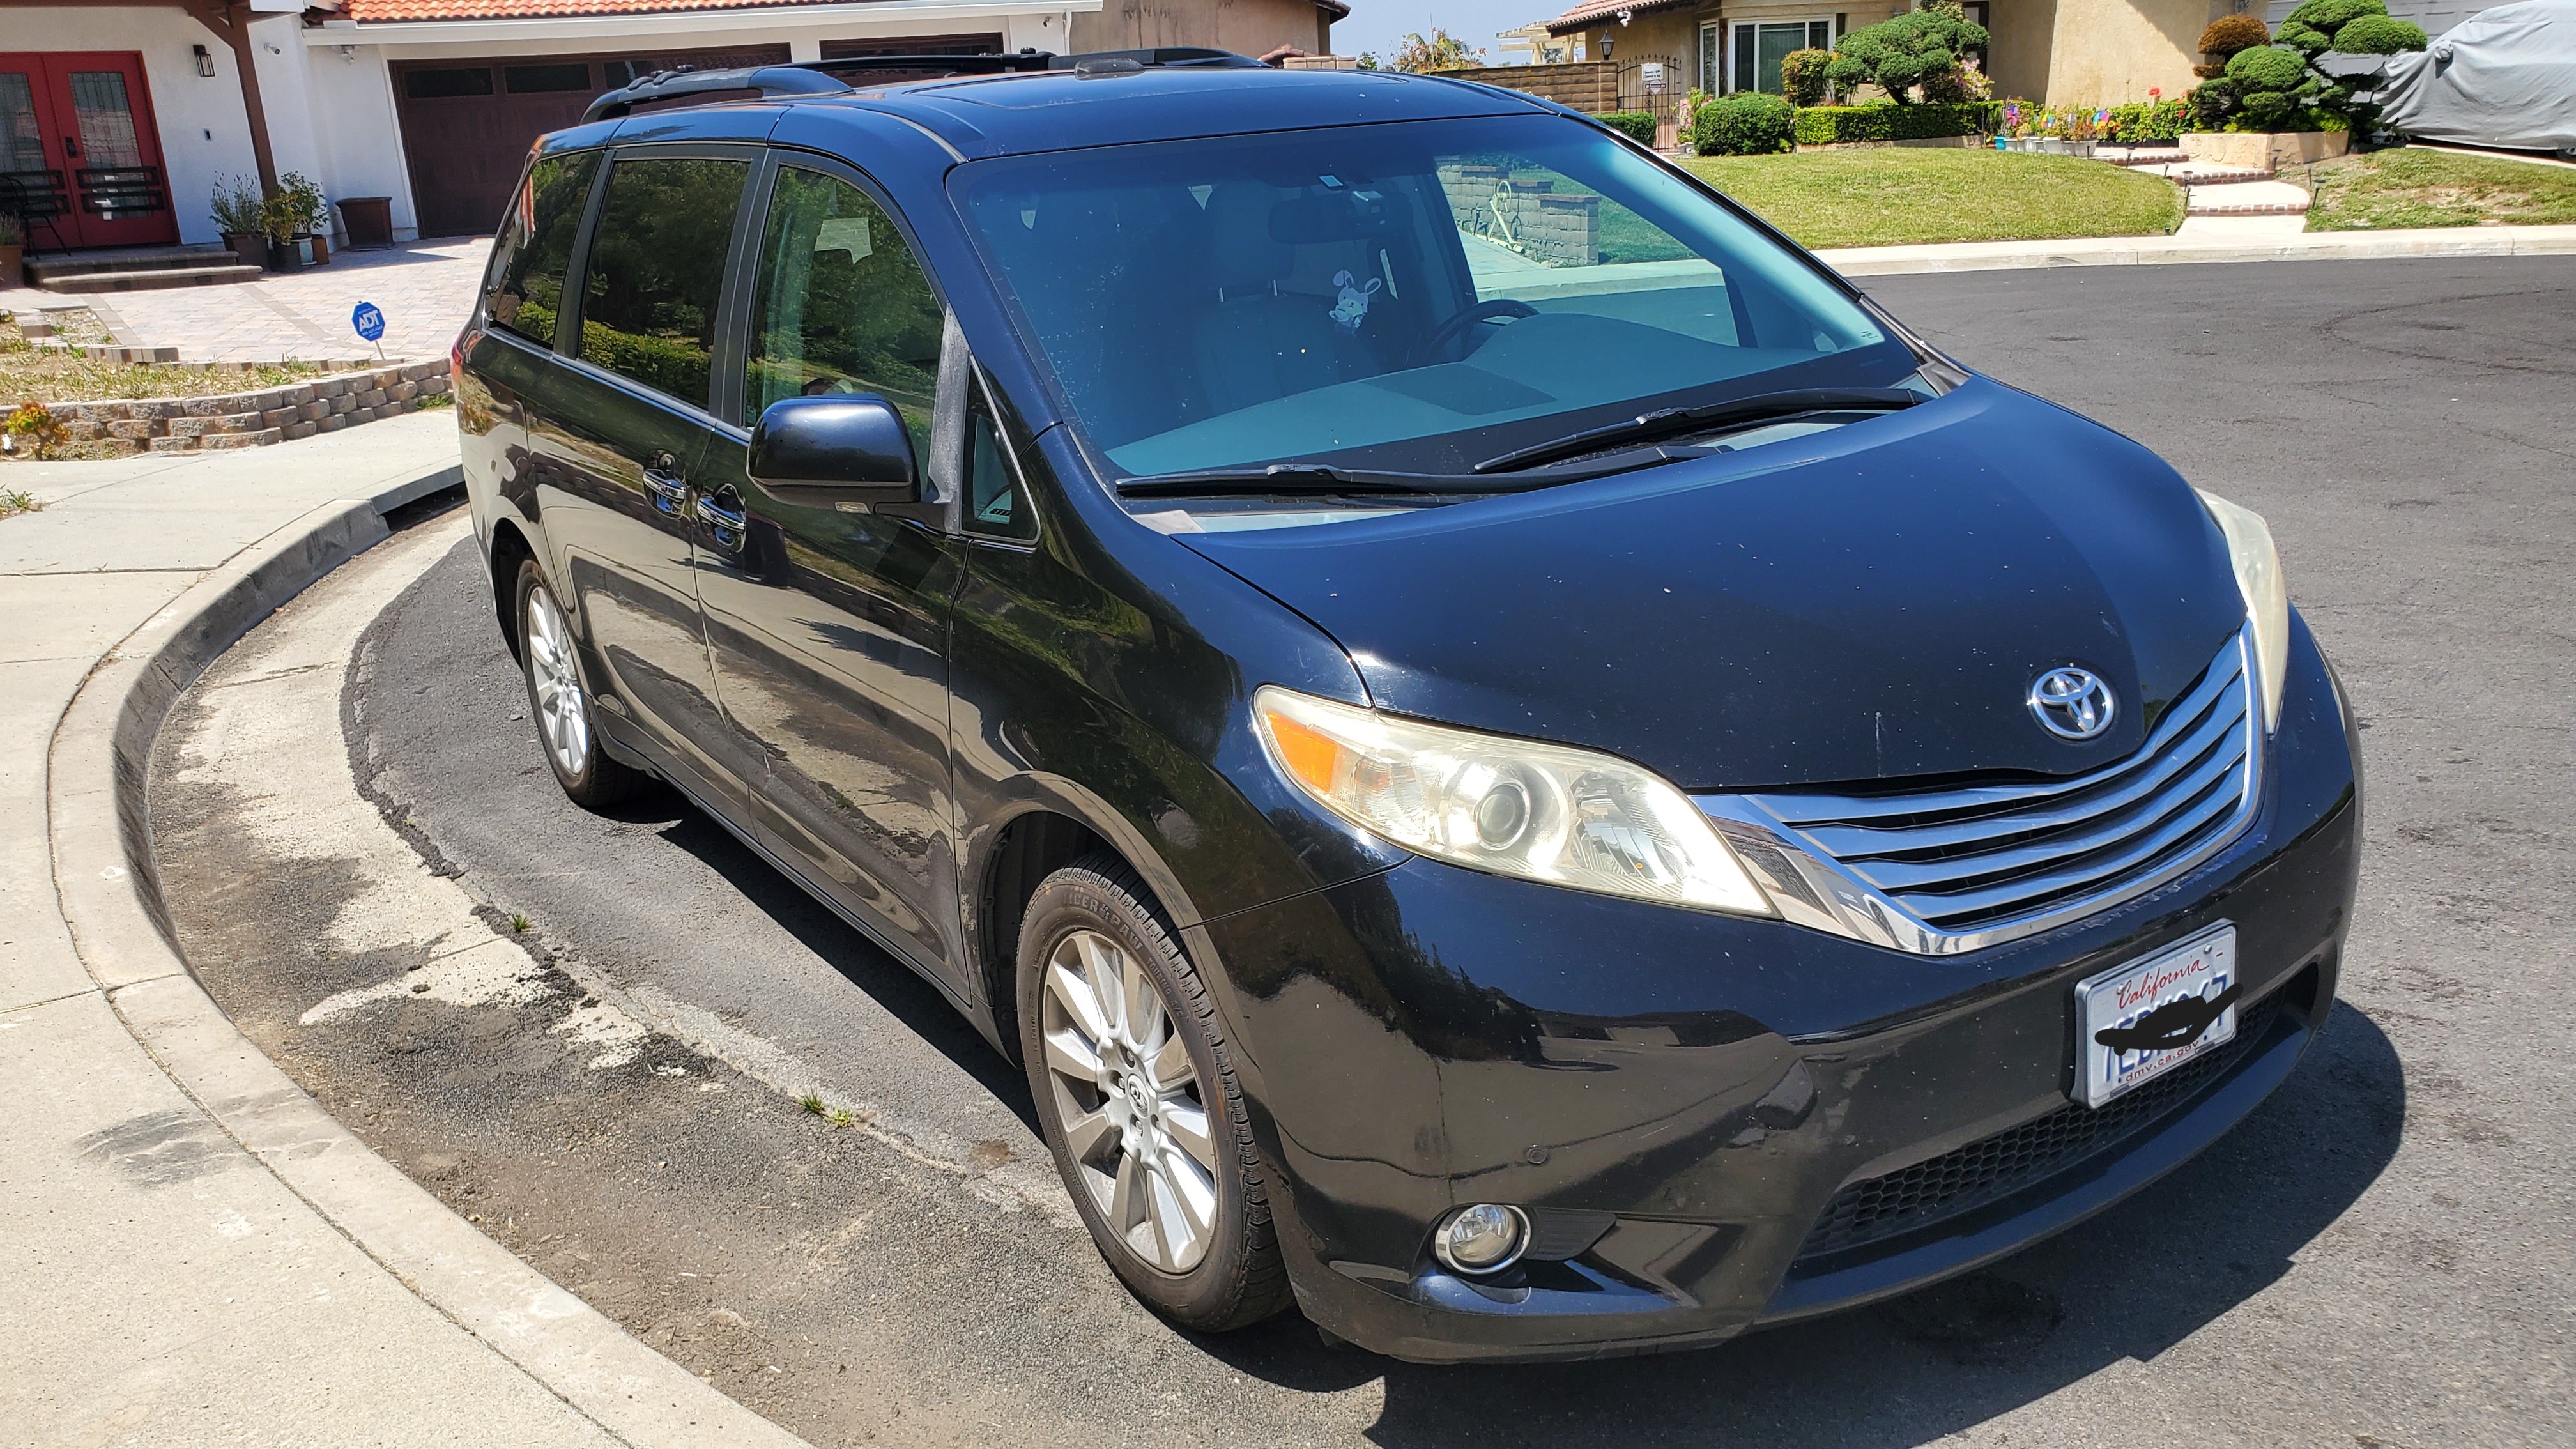 Used 2012 Toyota Sienna for Sale - Kelley Blue Book